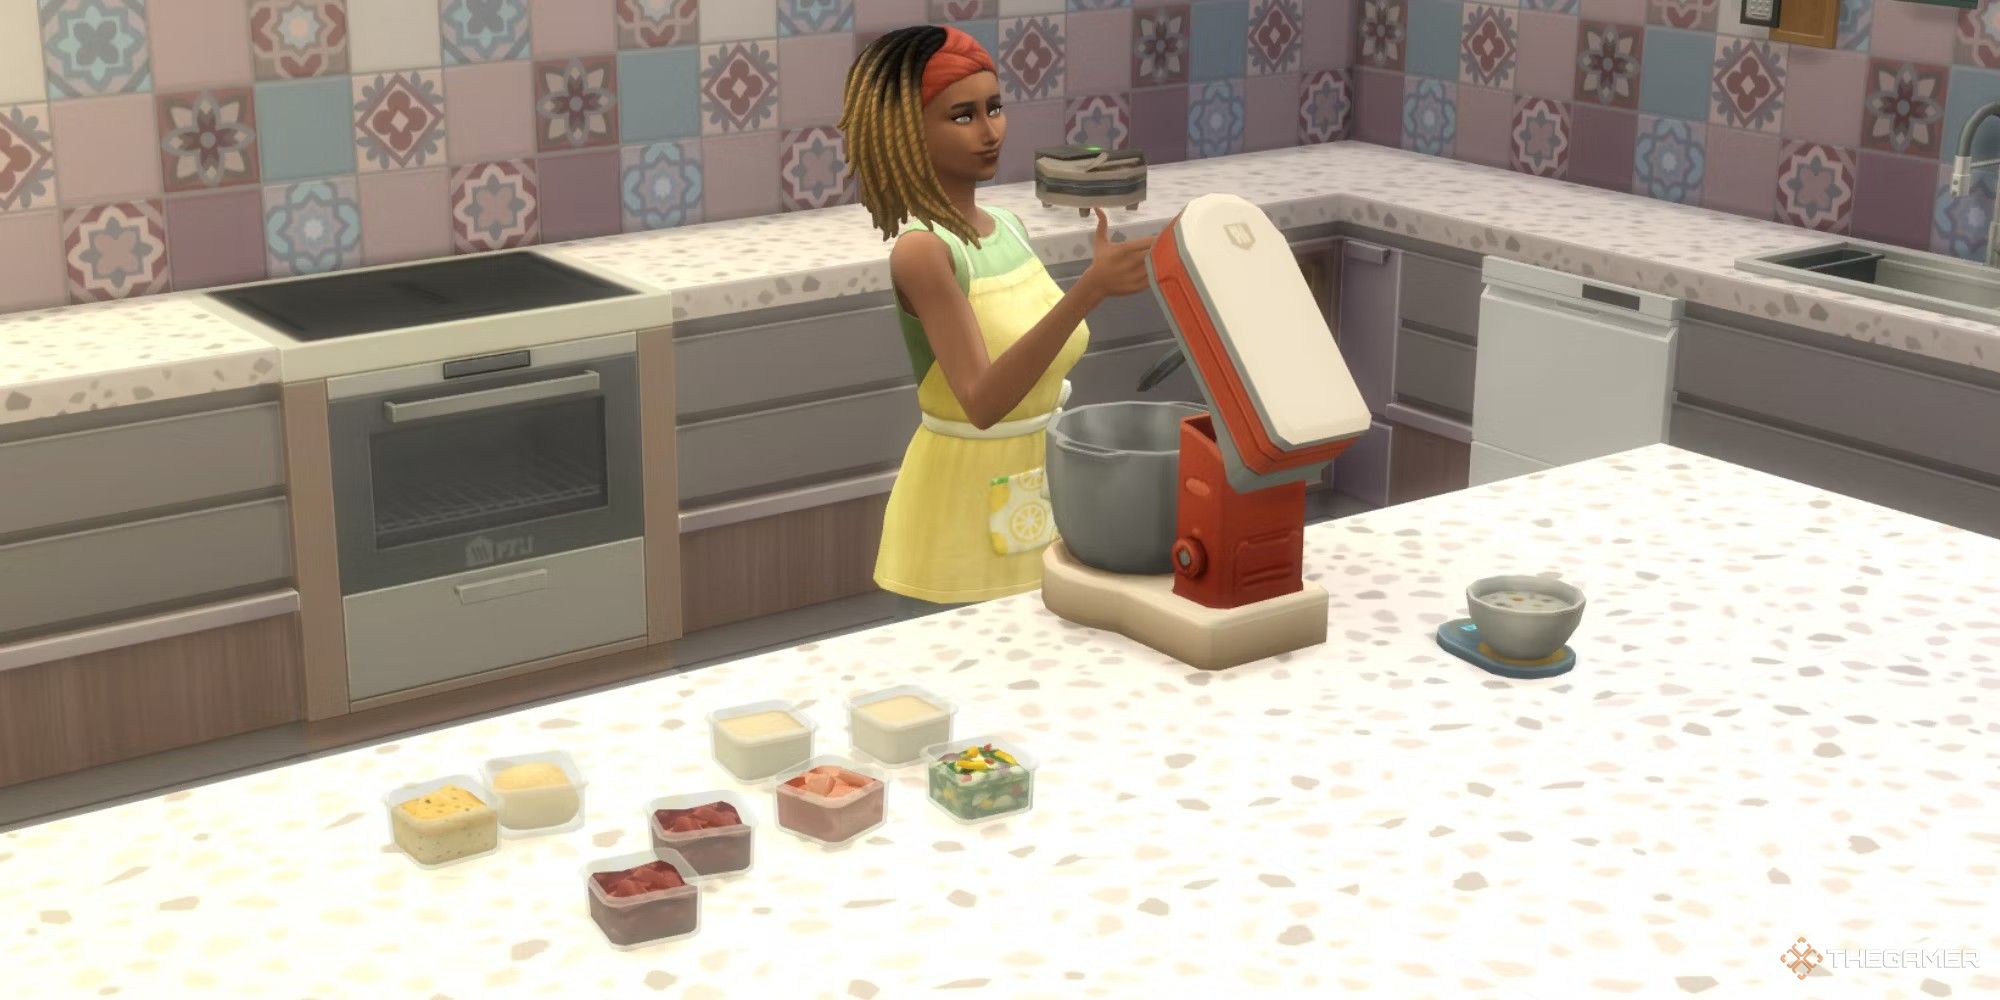 The Sims 4 Home Chef Hustle Stuff Pack: Release date, waffle maker